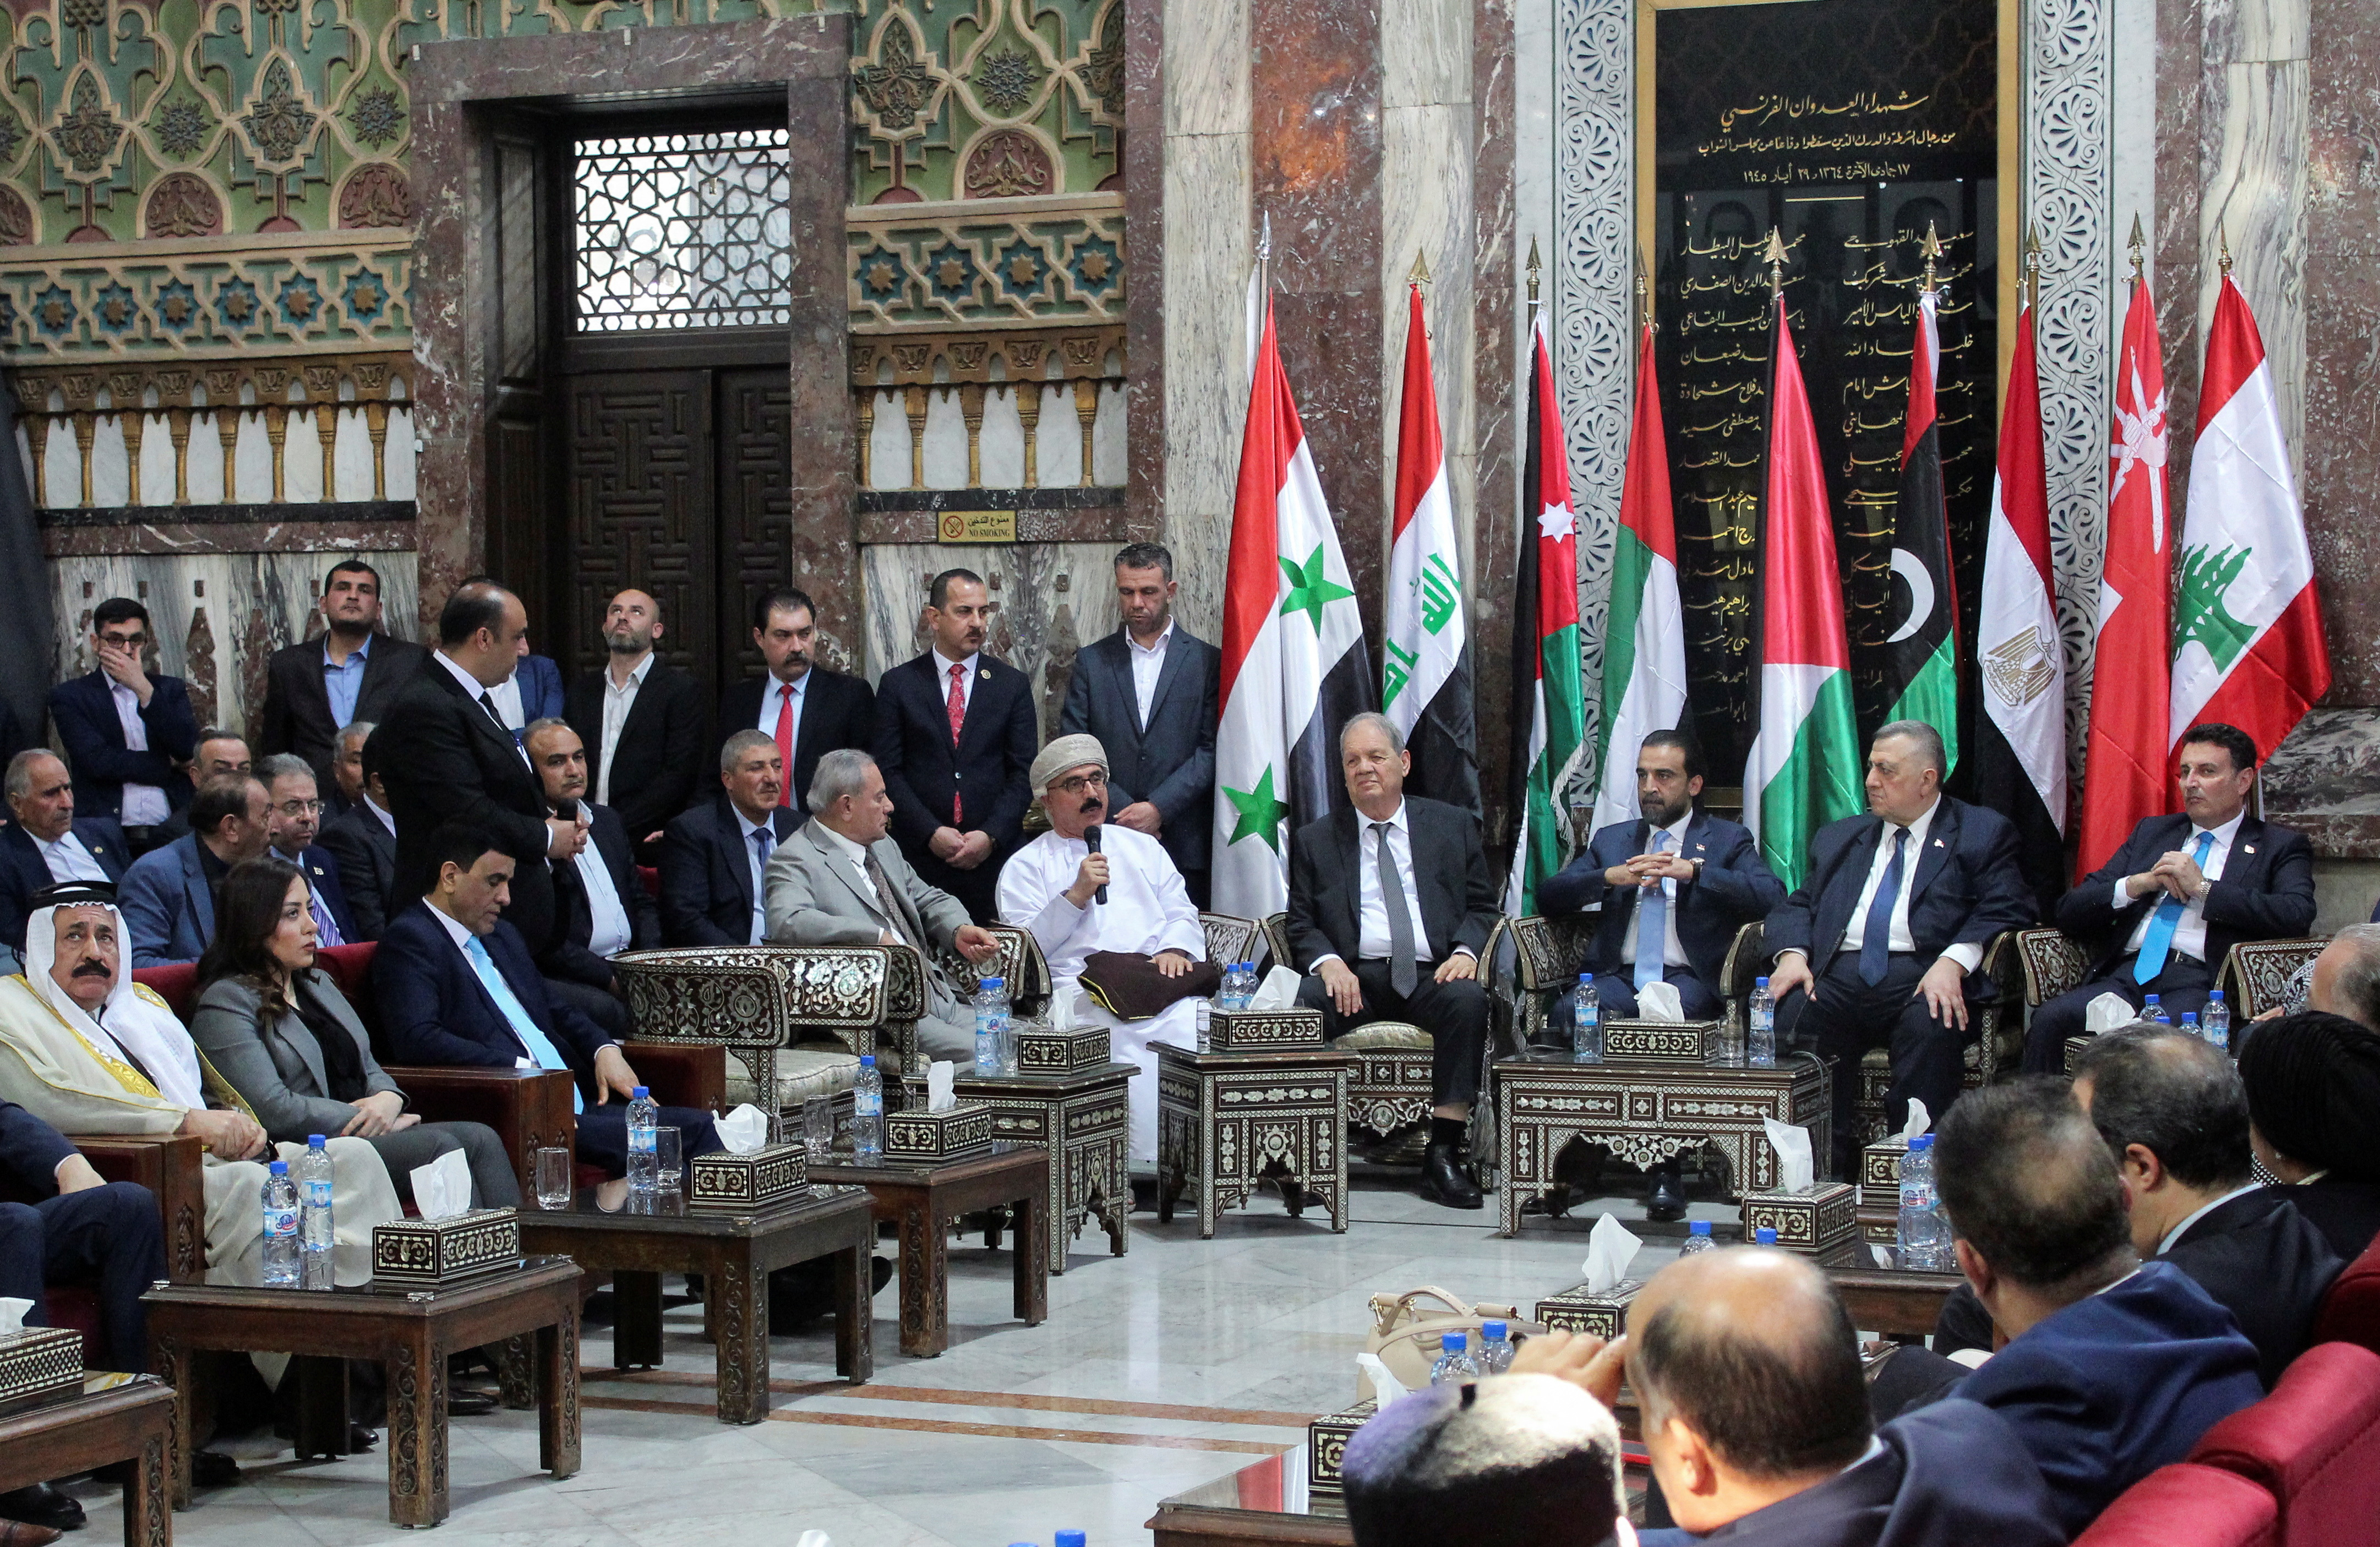 Syrian parliament members meet with a delegation from the Arab Inter-Parliamentary Union in Damascus